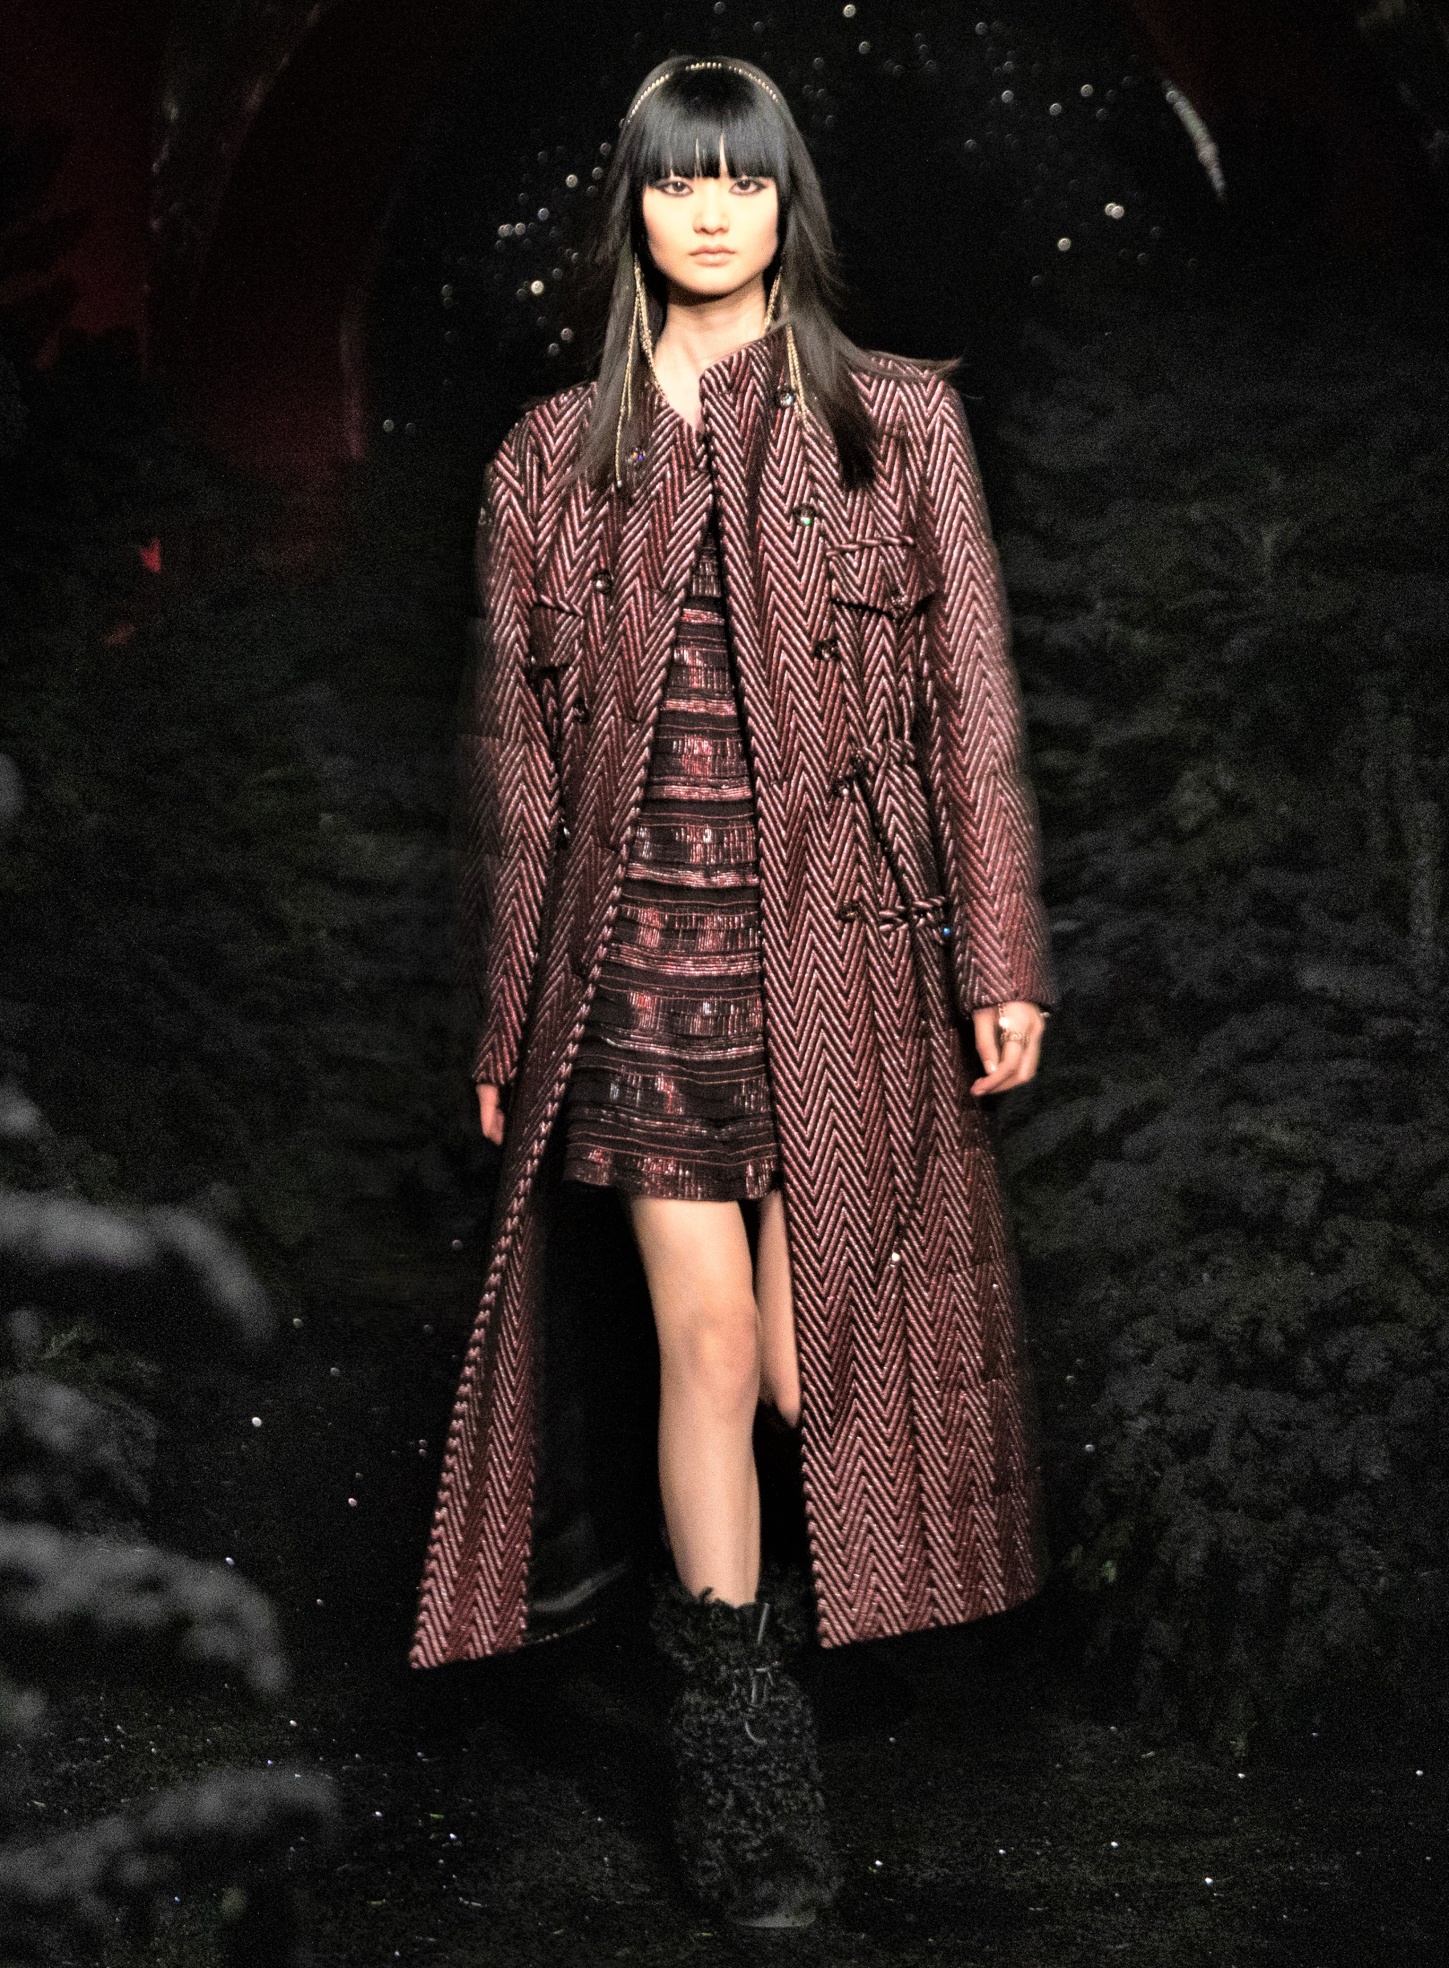 CHANEL Paris 2 burgundy outfit vogue cropped.jpg